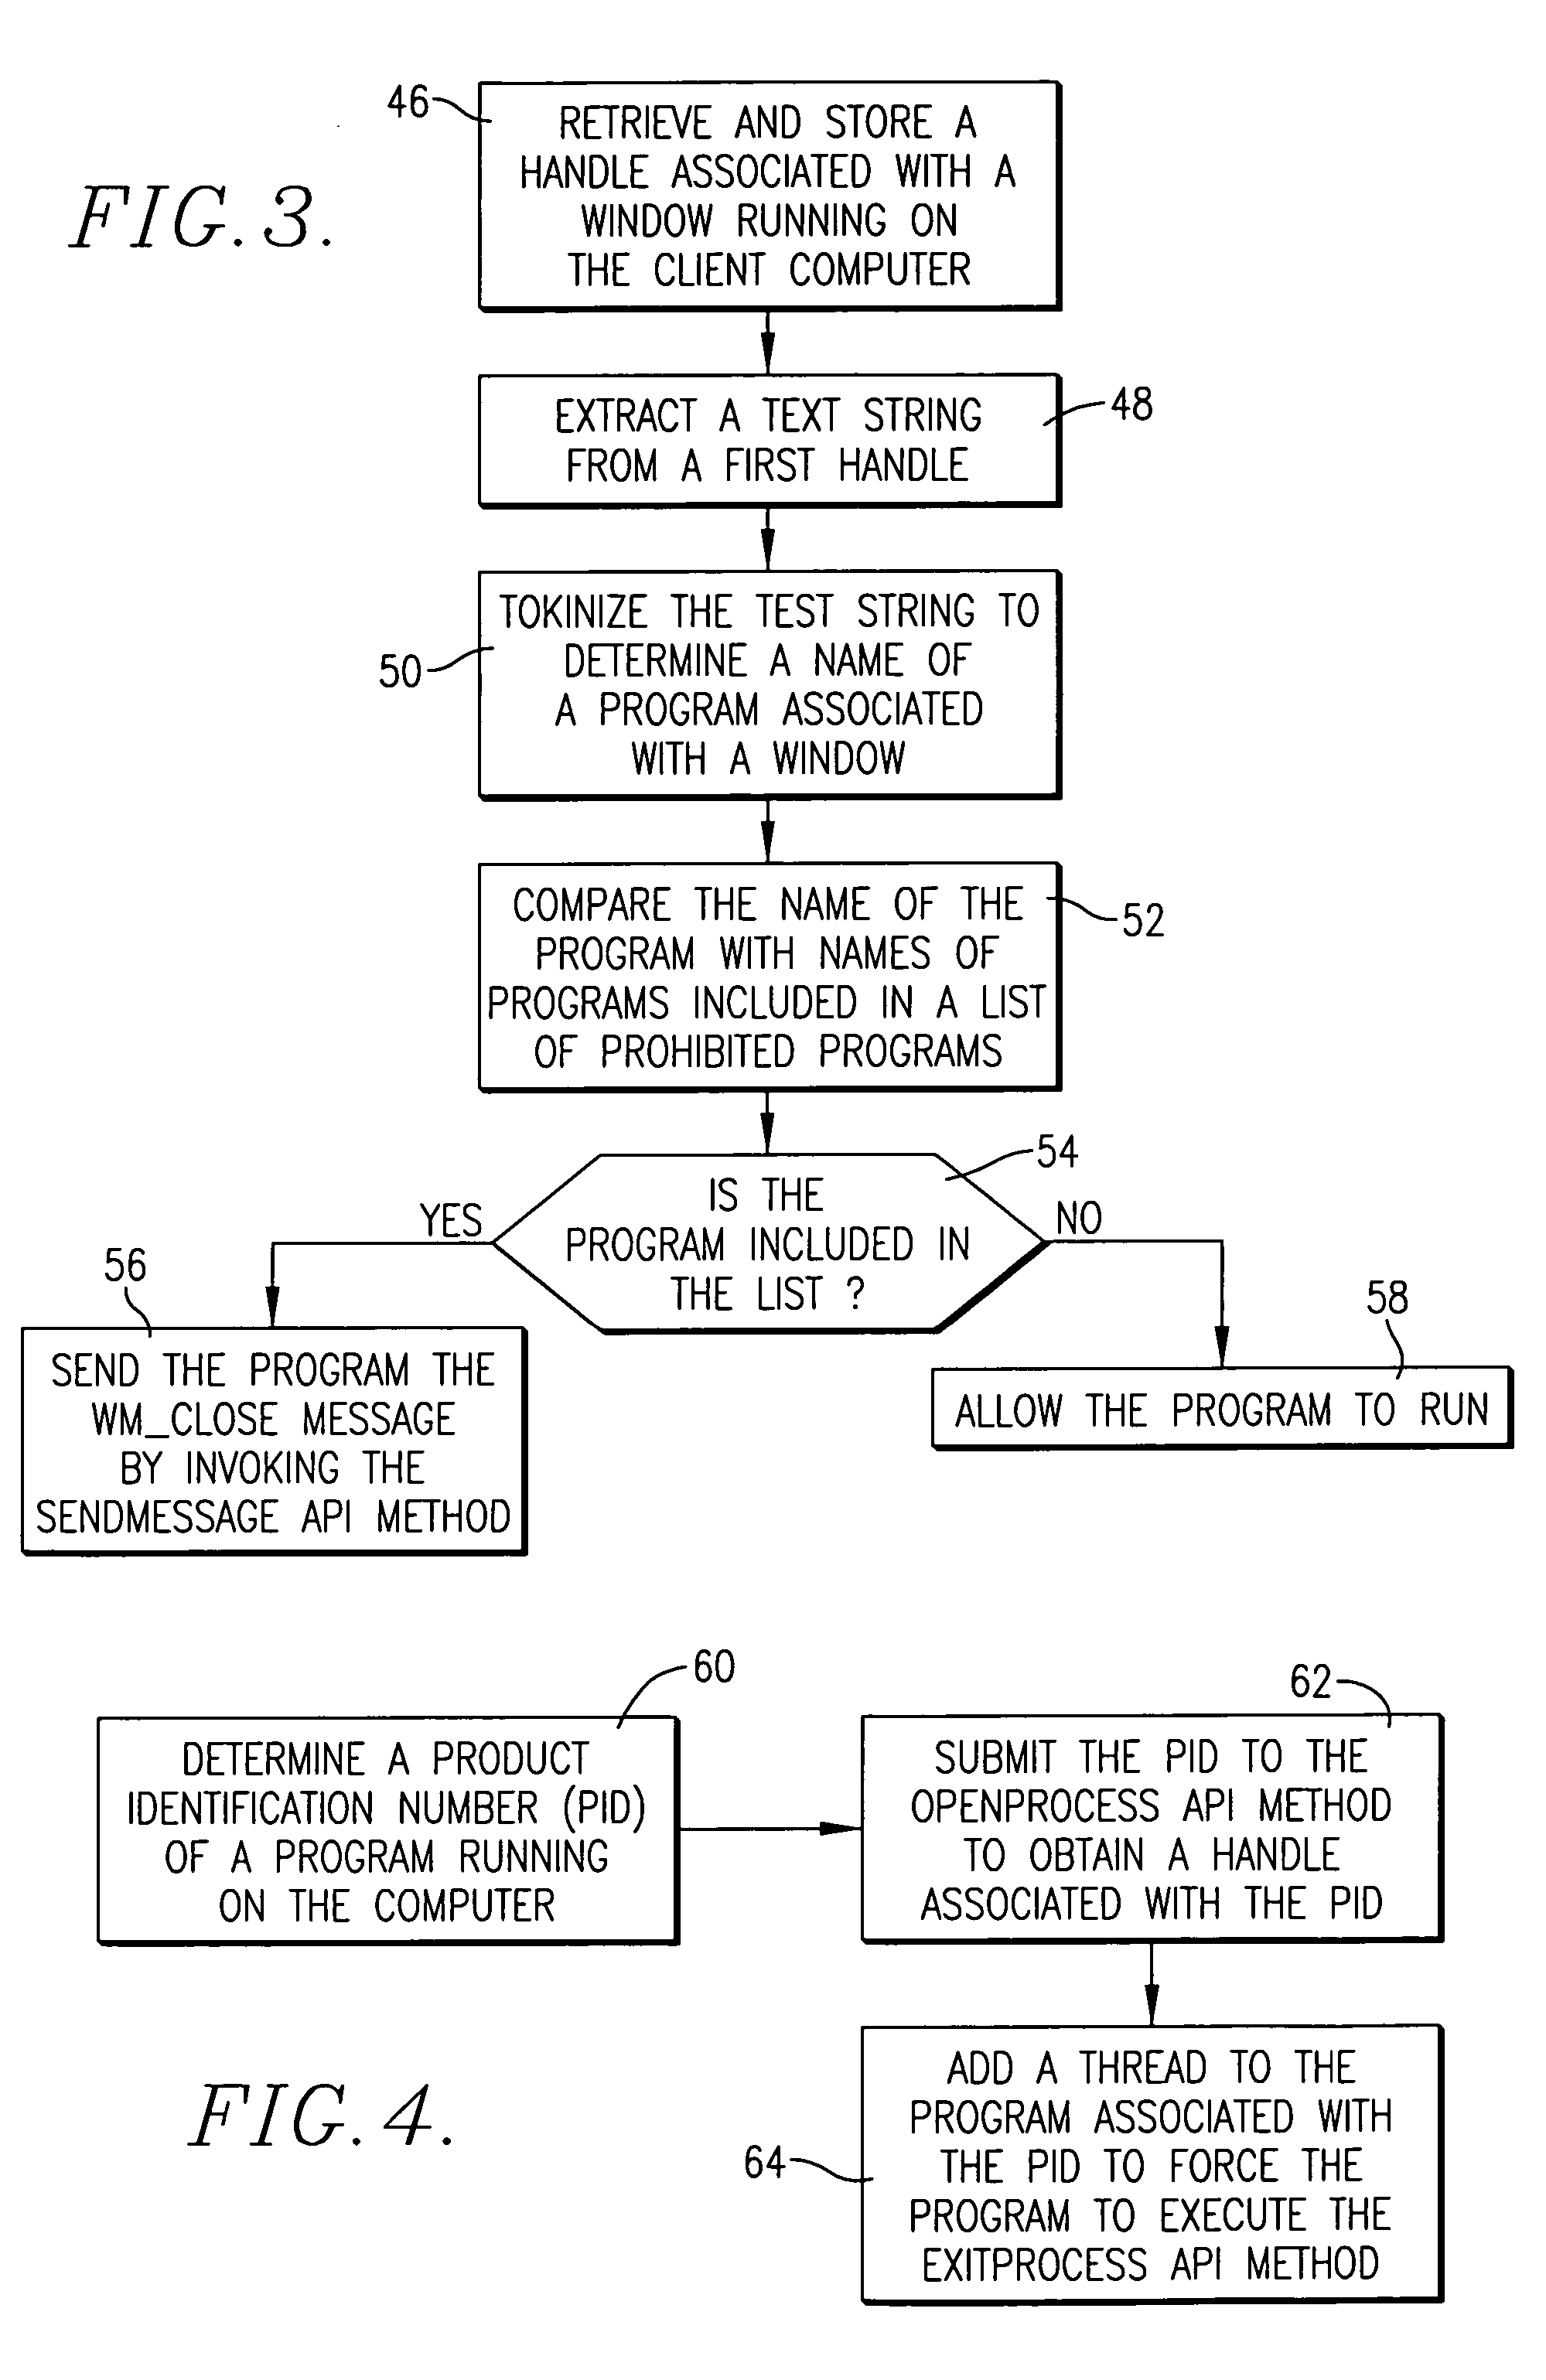 System and method for managing the execution of unauthorized programs on a university computer network